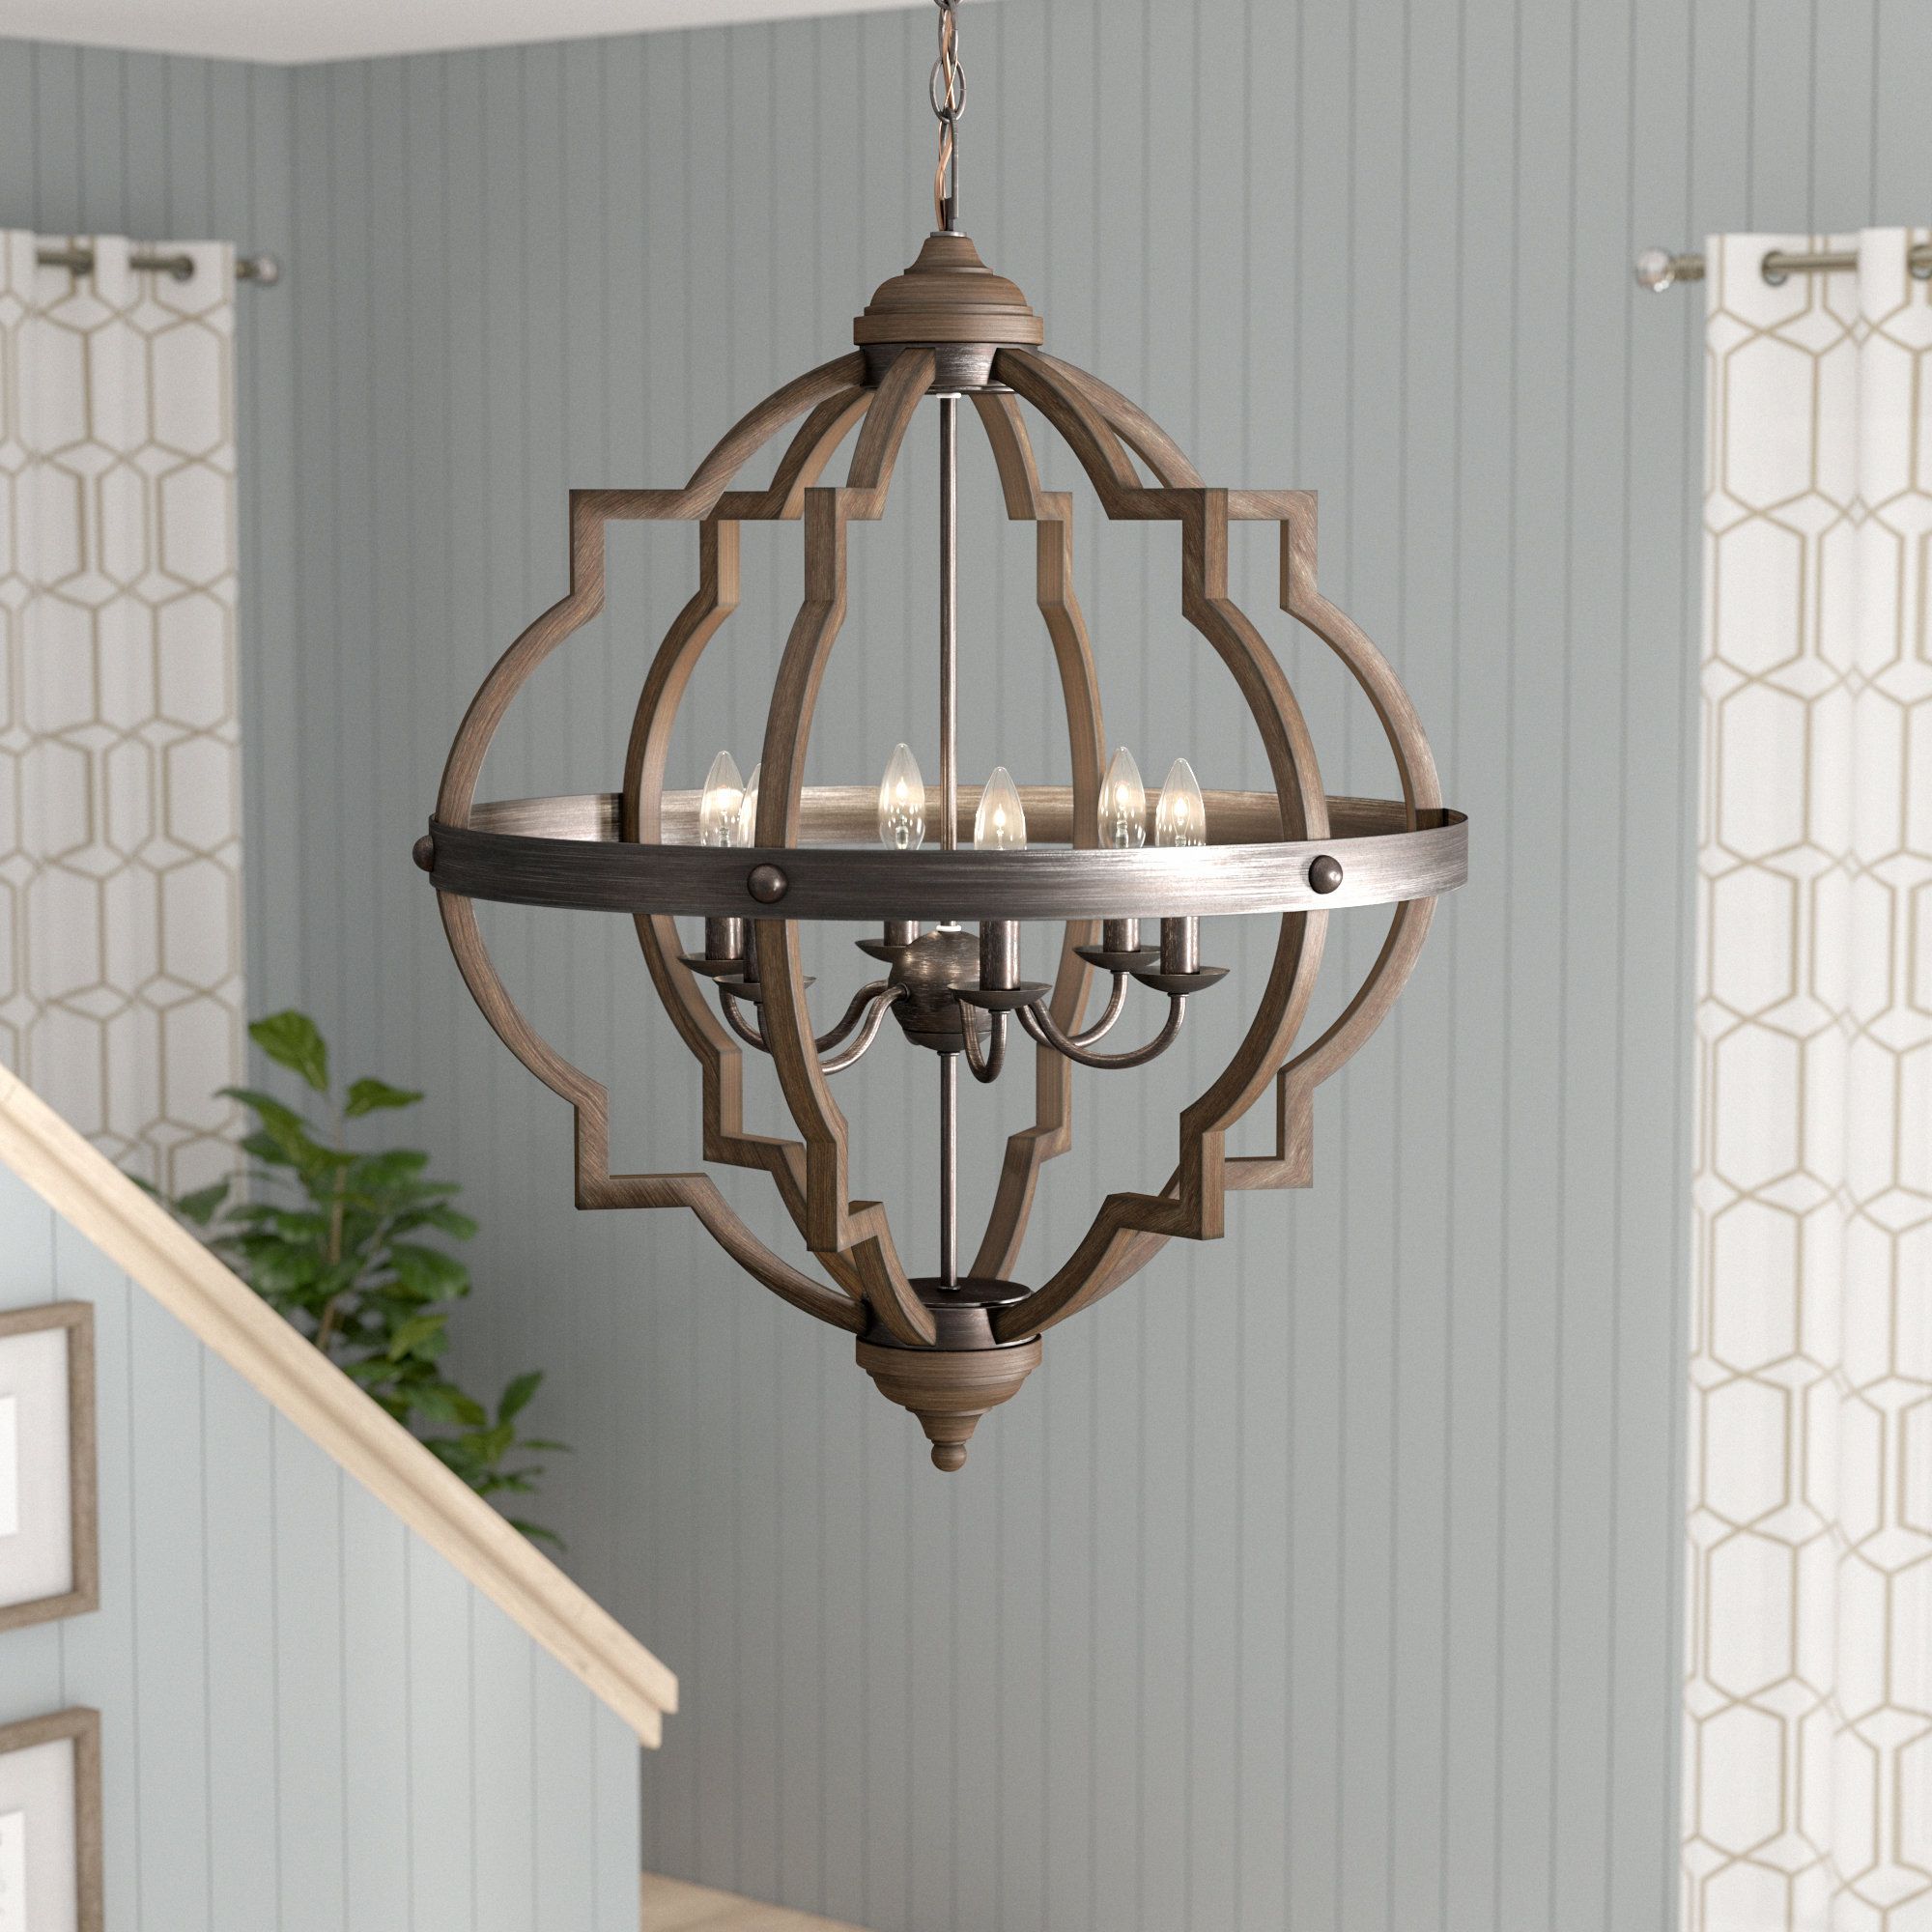 Preferred Bennington 6 Light Candle Style Chandelier Pertaining To Bennington 4 Light Candle Style Chandeliers (View 4 of 25)